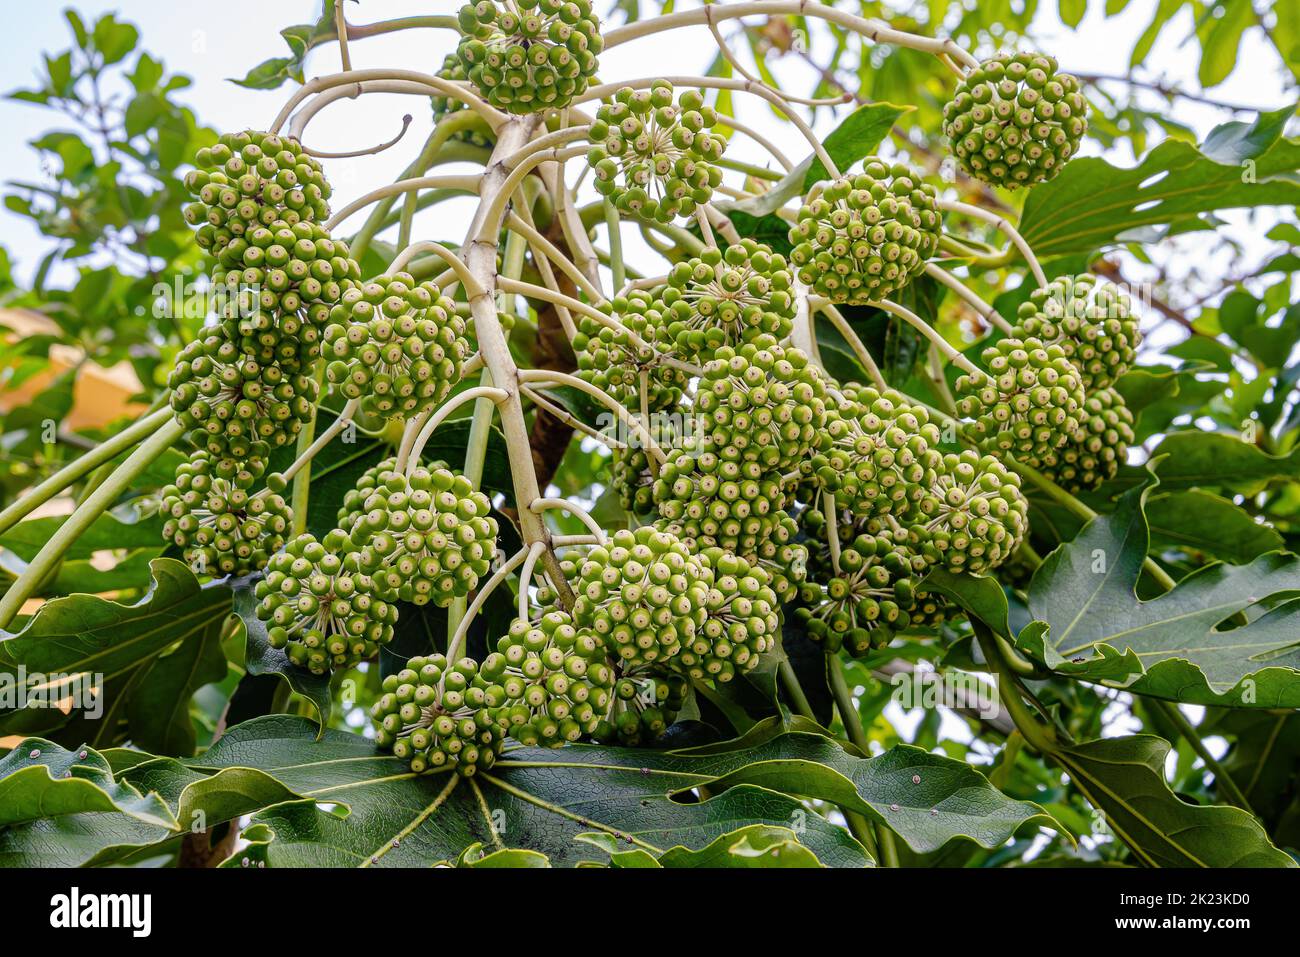 Closeup on Fatsia japonica fruits in a garden in Pesaro, Marche region of Italy Stock Photo